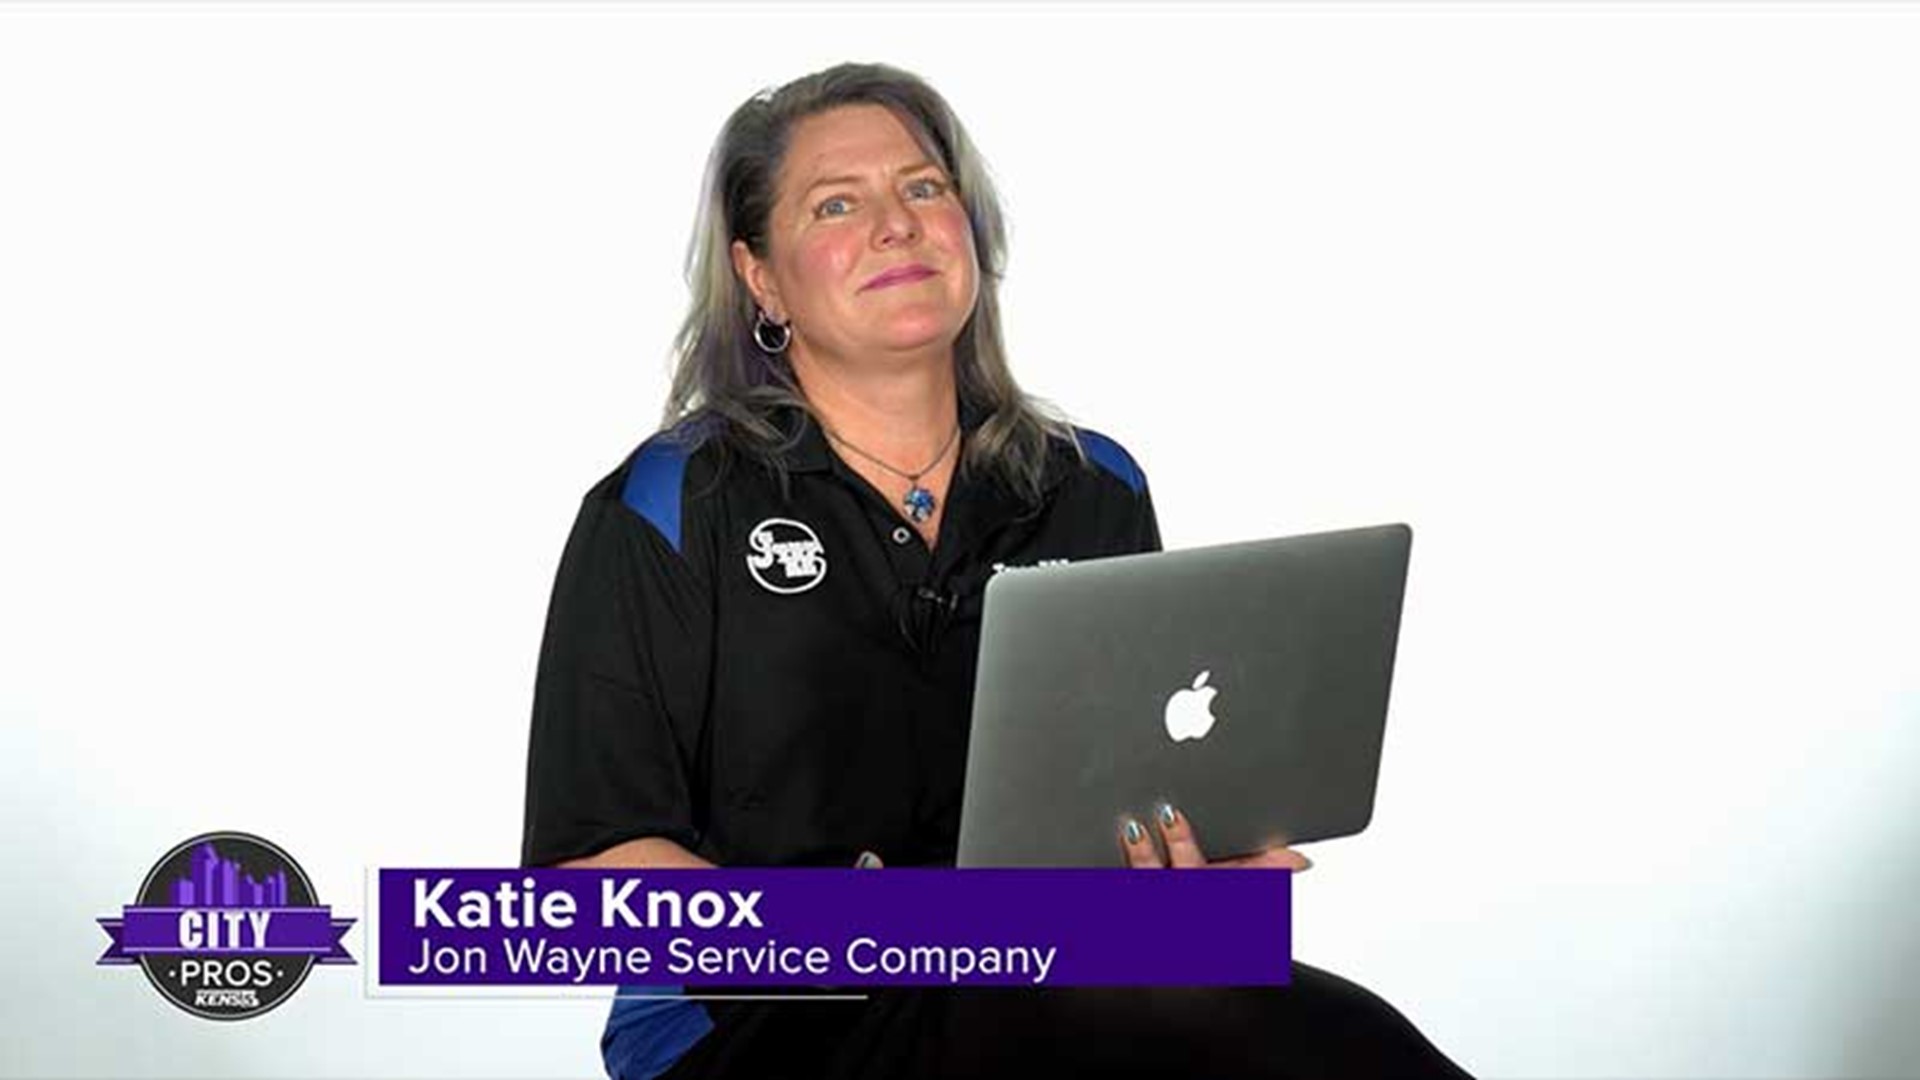 Katie Knox is part of the technical development department at Jon Wayne Service Company, and she's here to answer some of your most frequent questions.